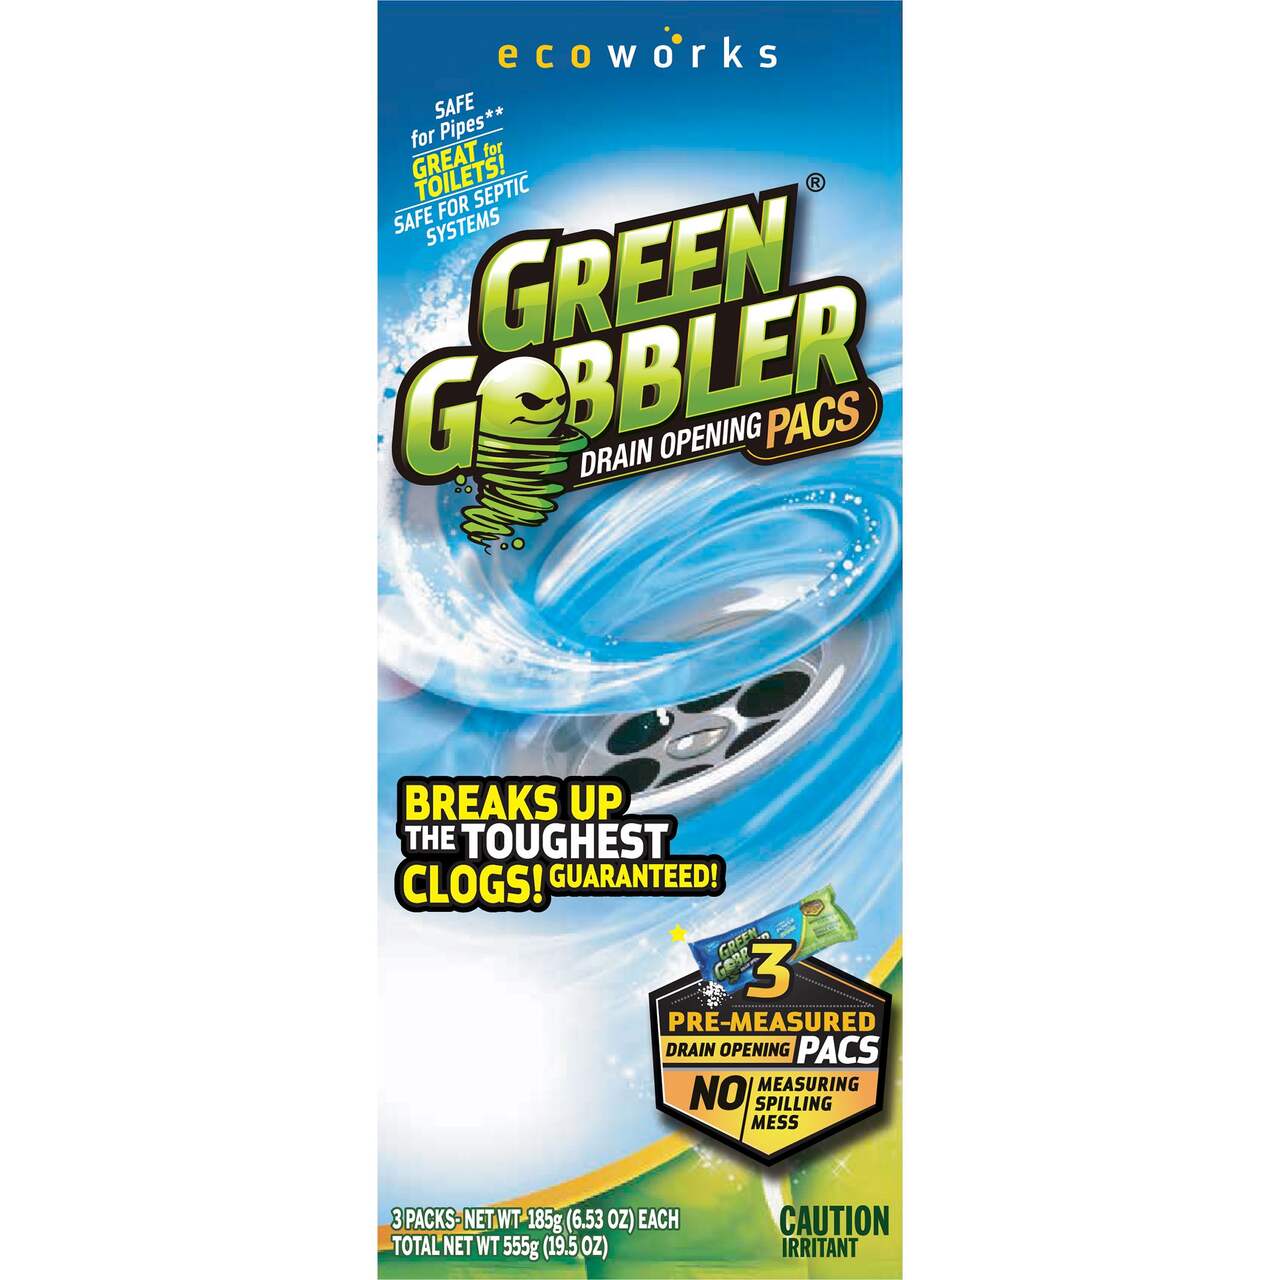 https://media-www.canadiantire.ca/product/living/cleaning/household-cleaning-solutions/1530494/green-gobbler-drain-opener-bccdf83f-2a50-4c43-8d70-458271cc1029-jpgrendition.jpg?imdensity=1&imwidth=1244&impolicy=mZoom